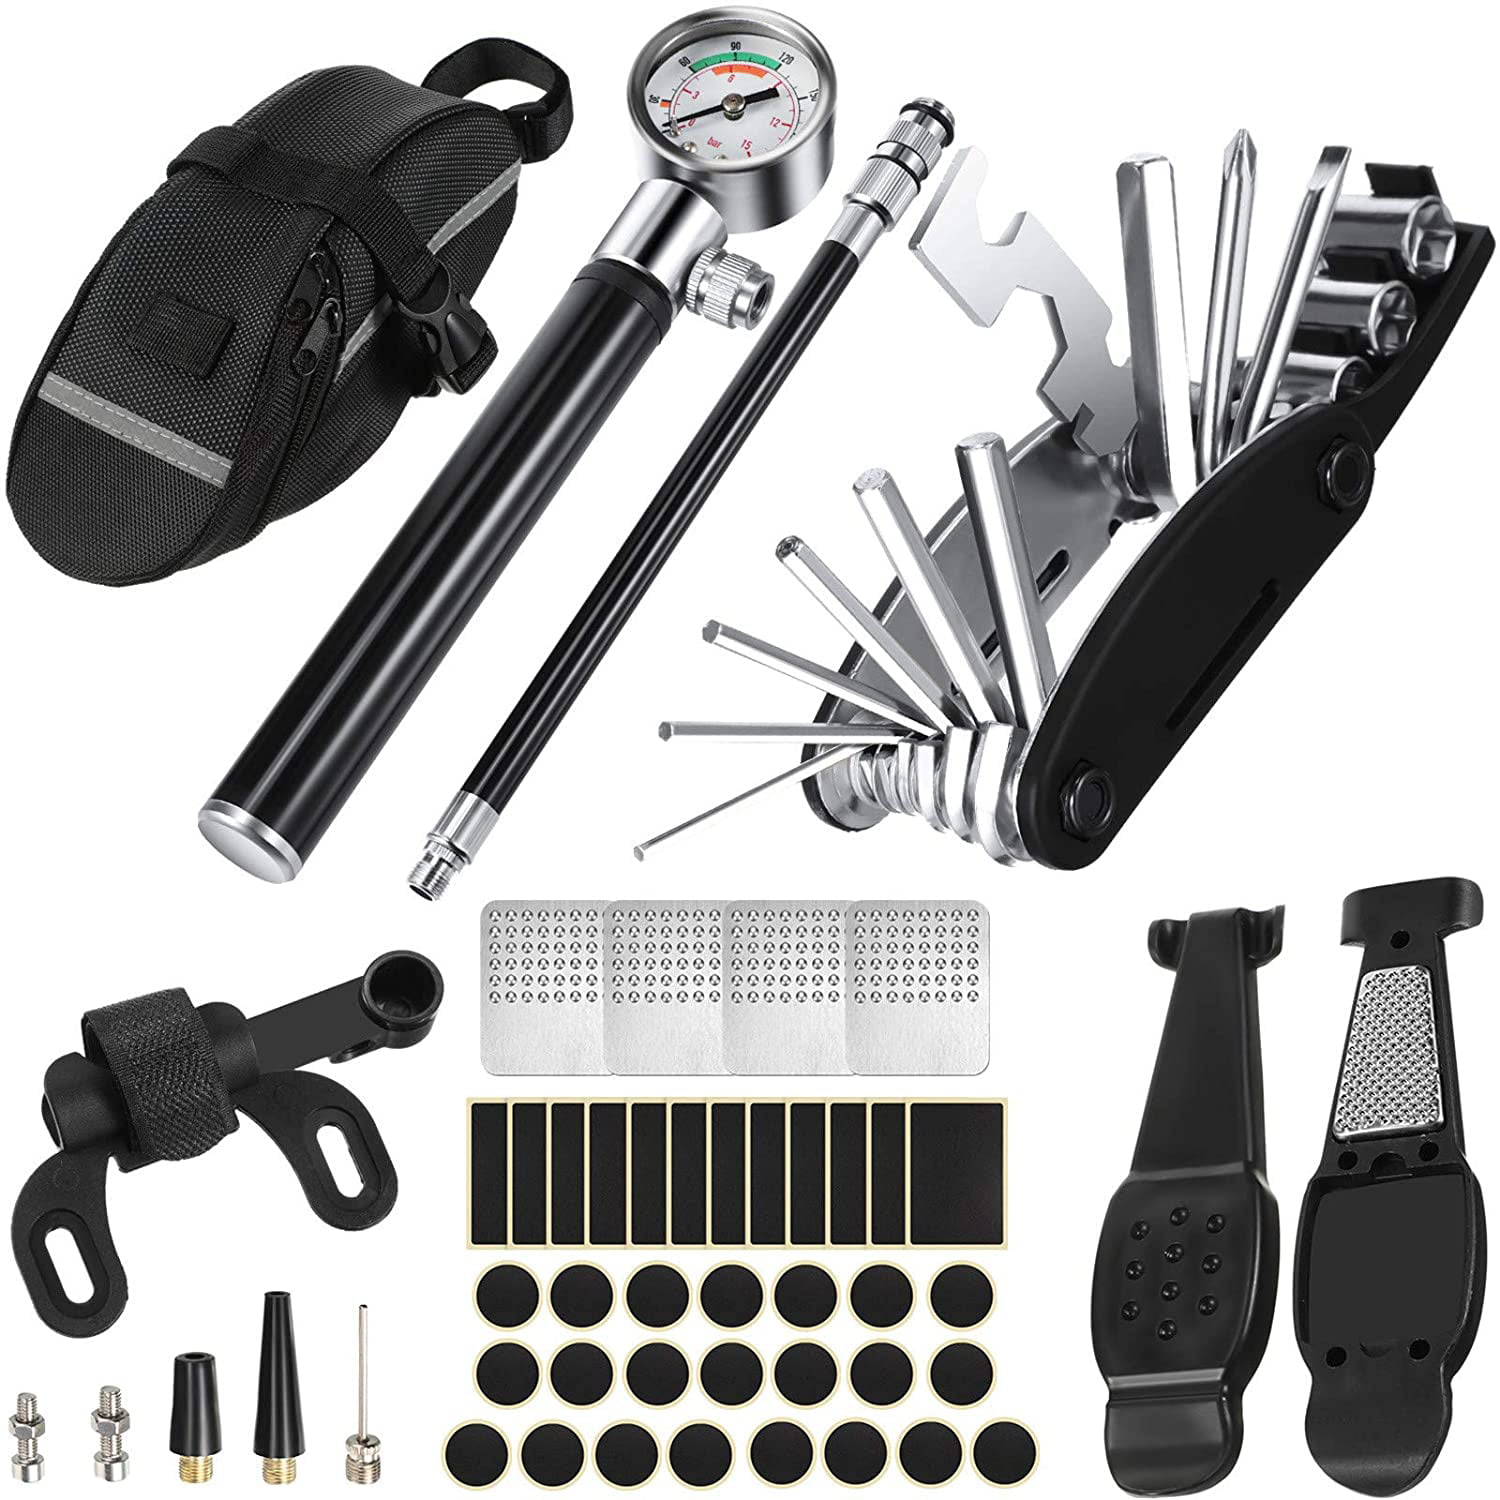 Bike Tire Repair Kit Practical Gift for Man 16 in 1 Bicycle Multi Tool with Handy Bag Included Glueless Tire Tube Patches & Tire Levers with 120 PSI Mini Pump 